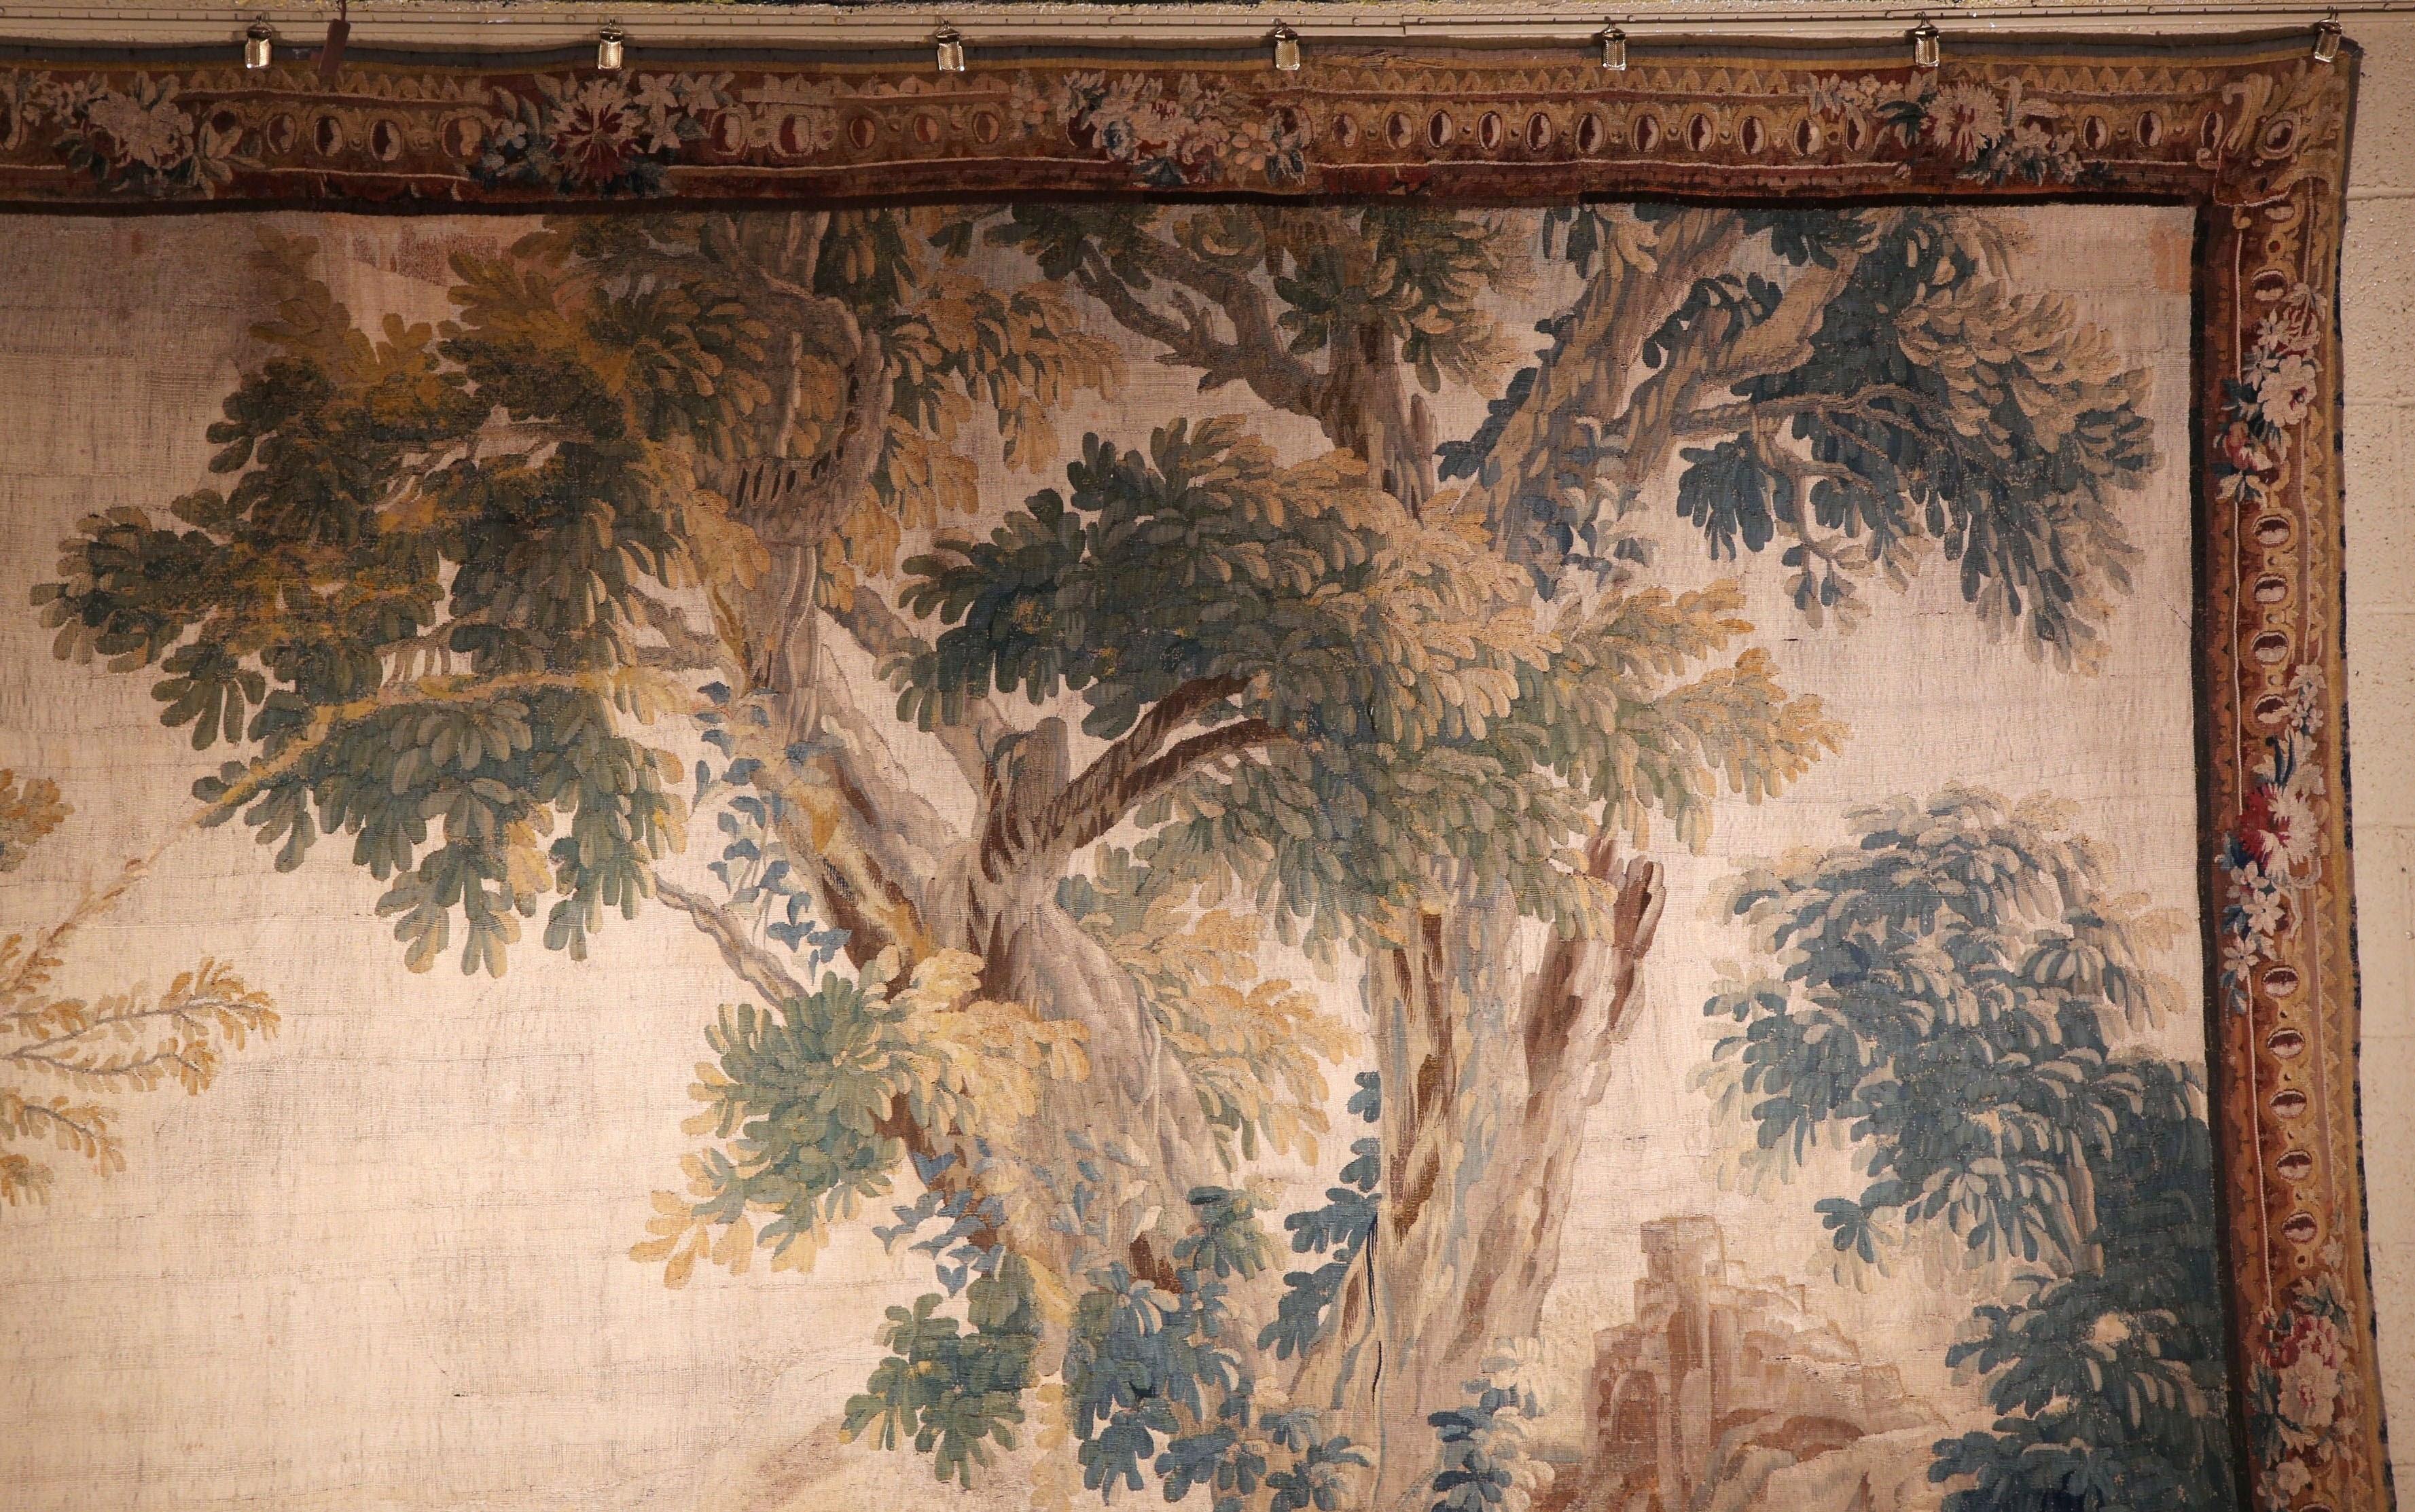 Hand-Woven Mid-18th Century French Aubusson Pastoral Tapestry in the Manner of J. B. Huet